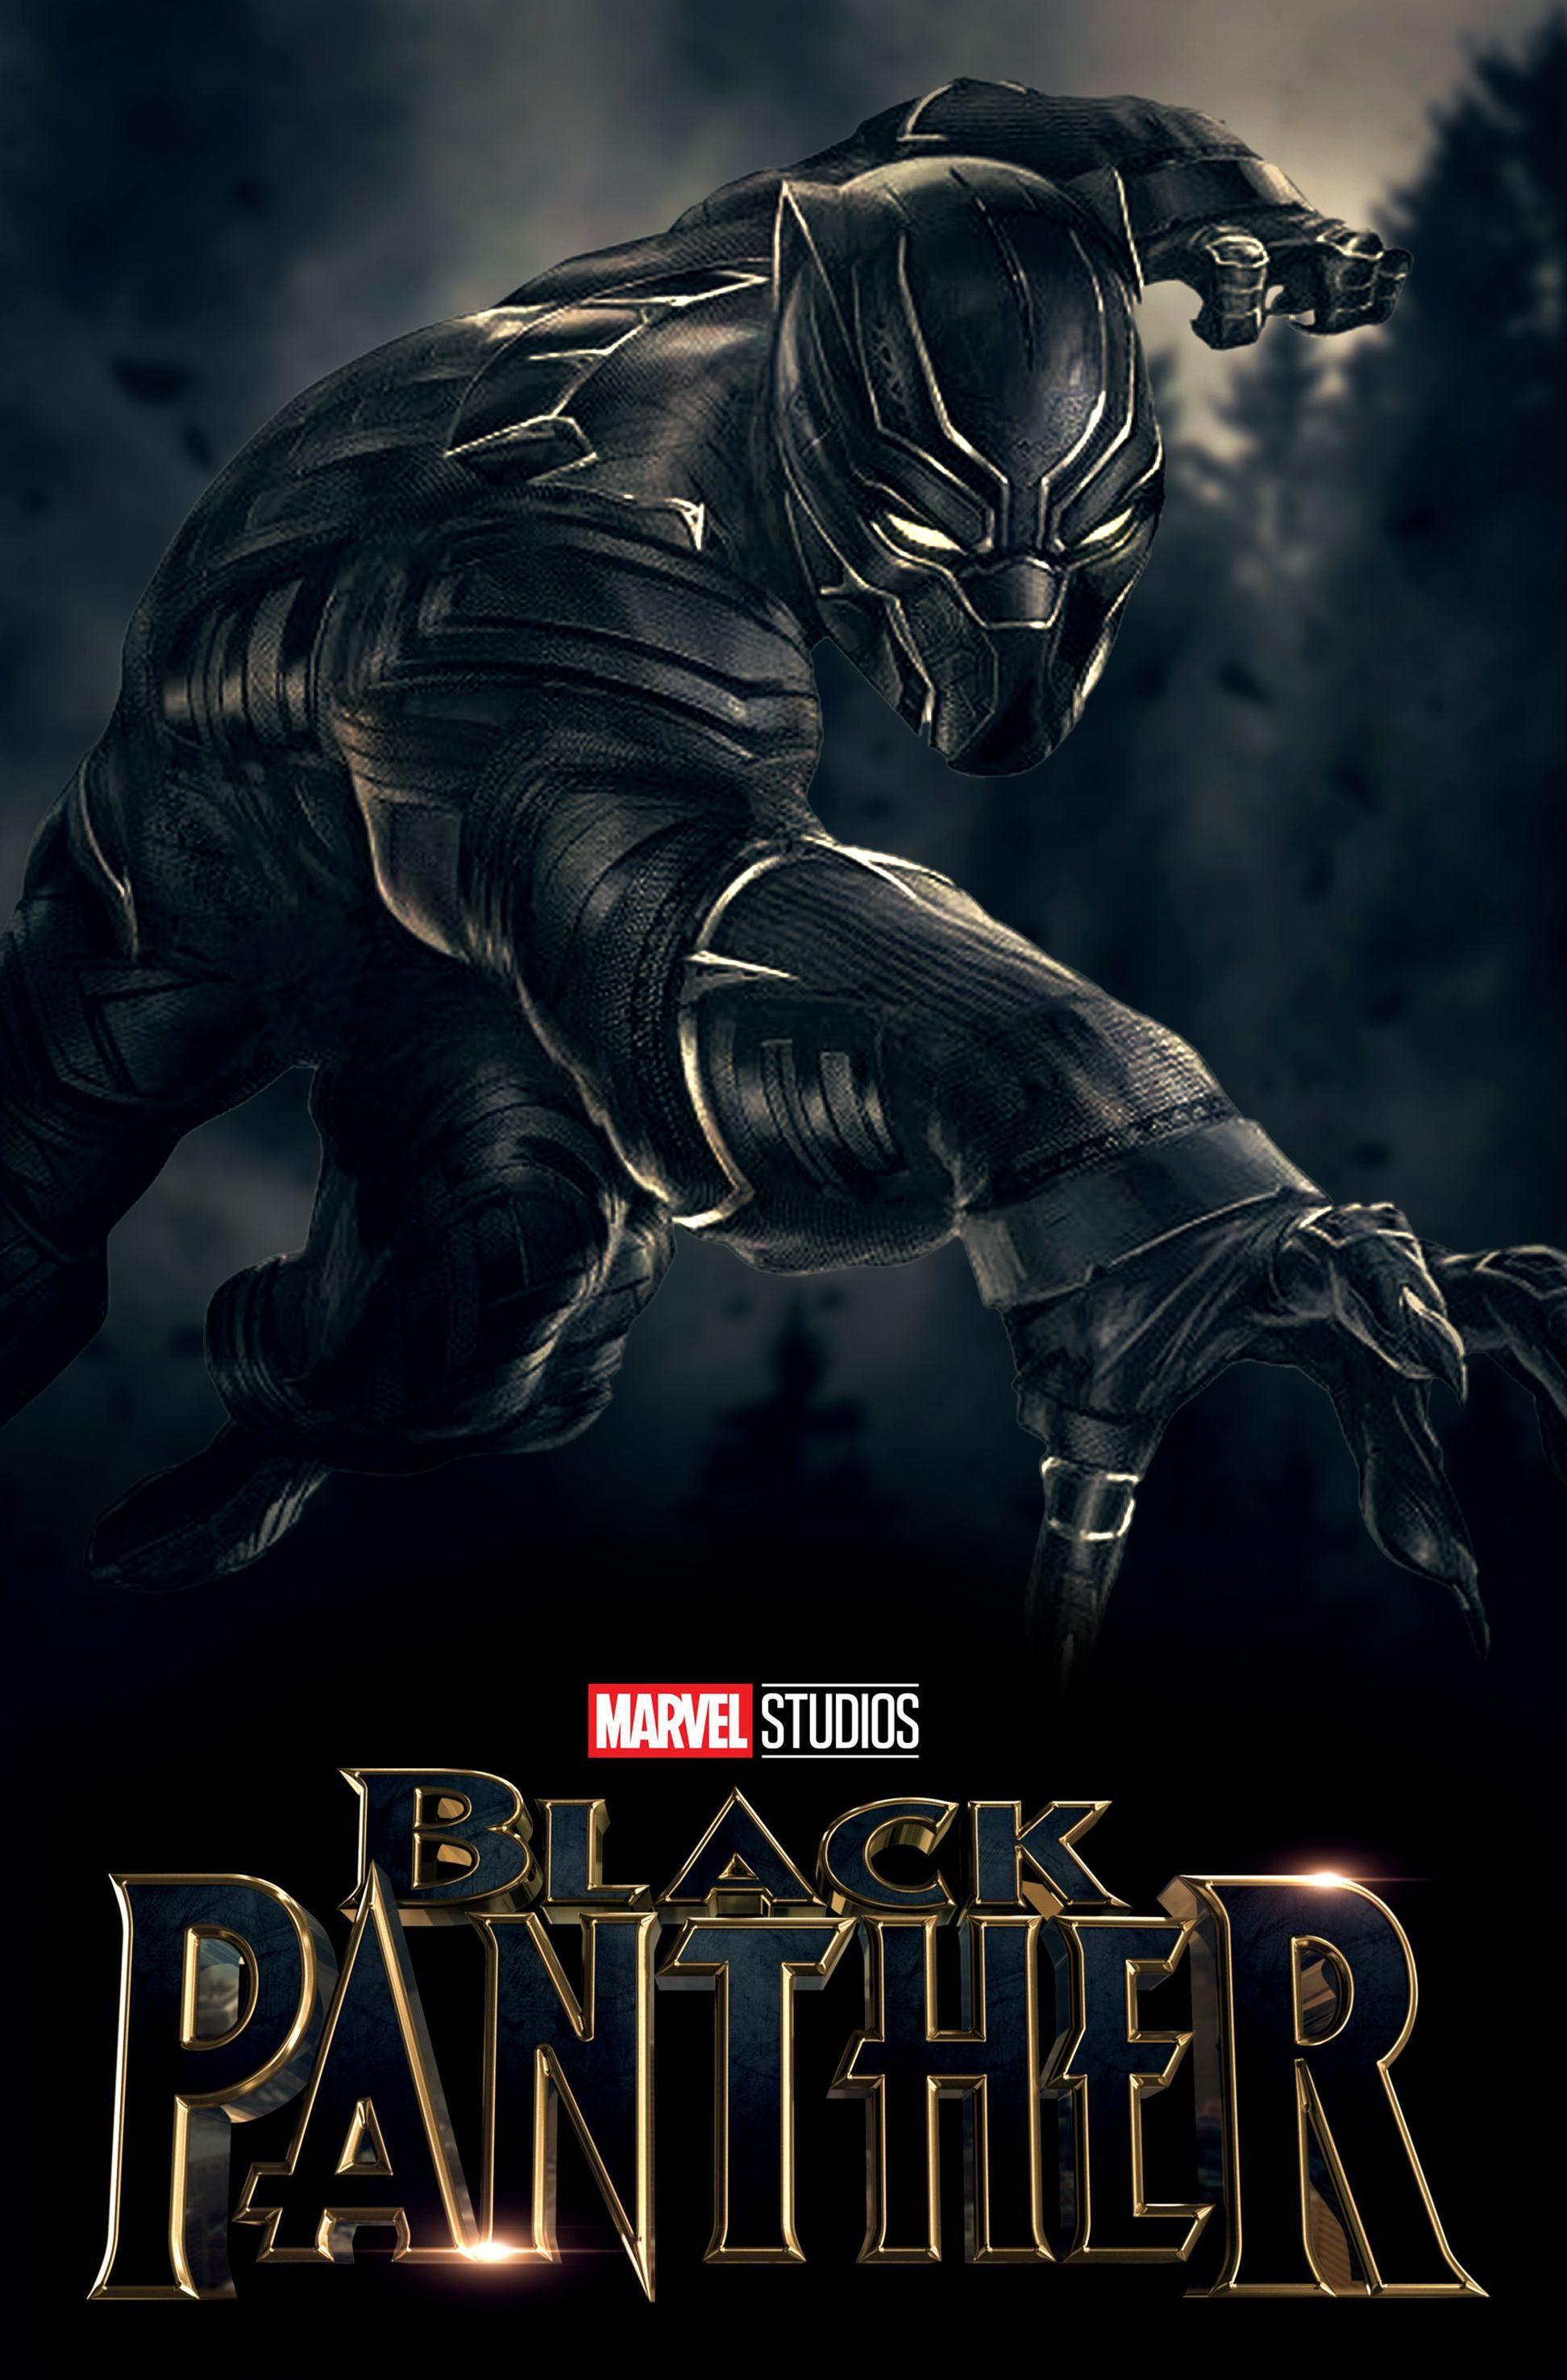 Black Panther Movie Download Free Pure HD Quality Mobile